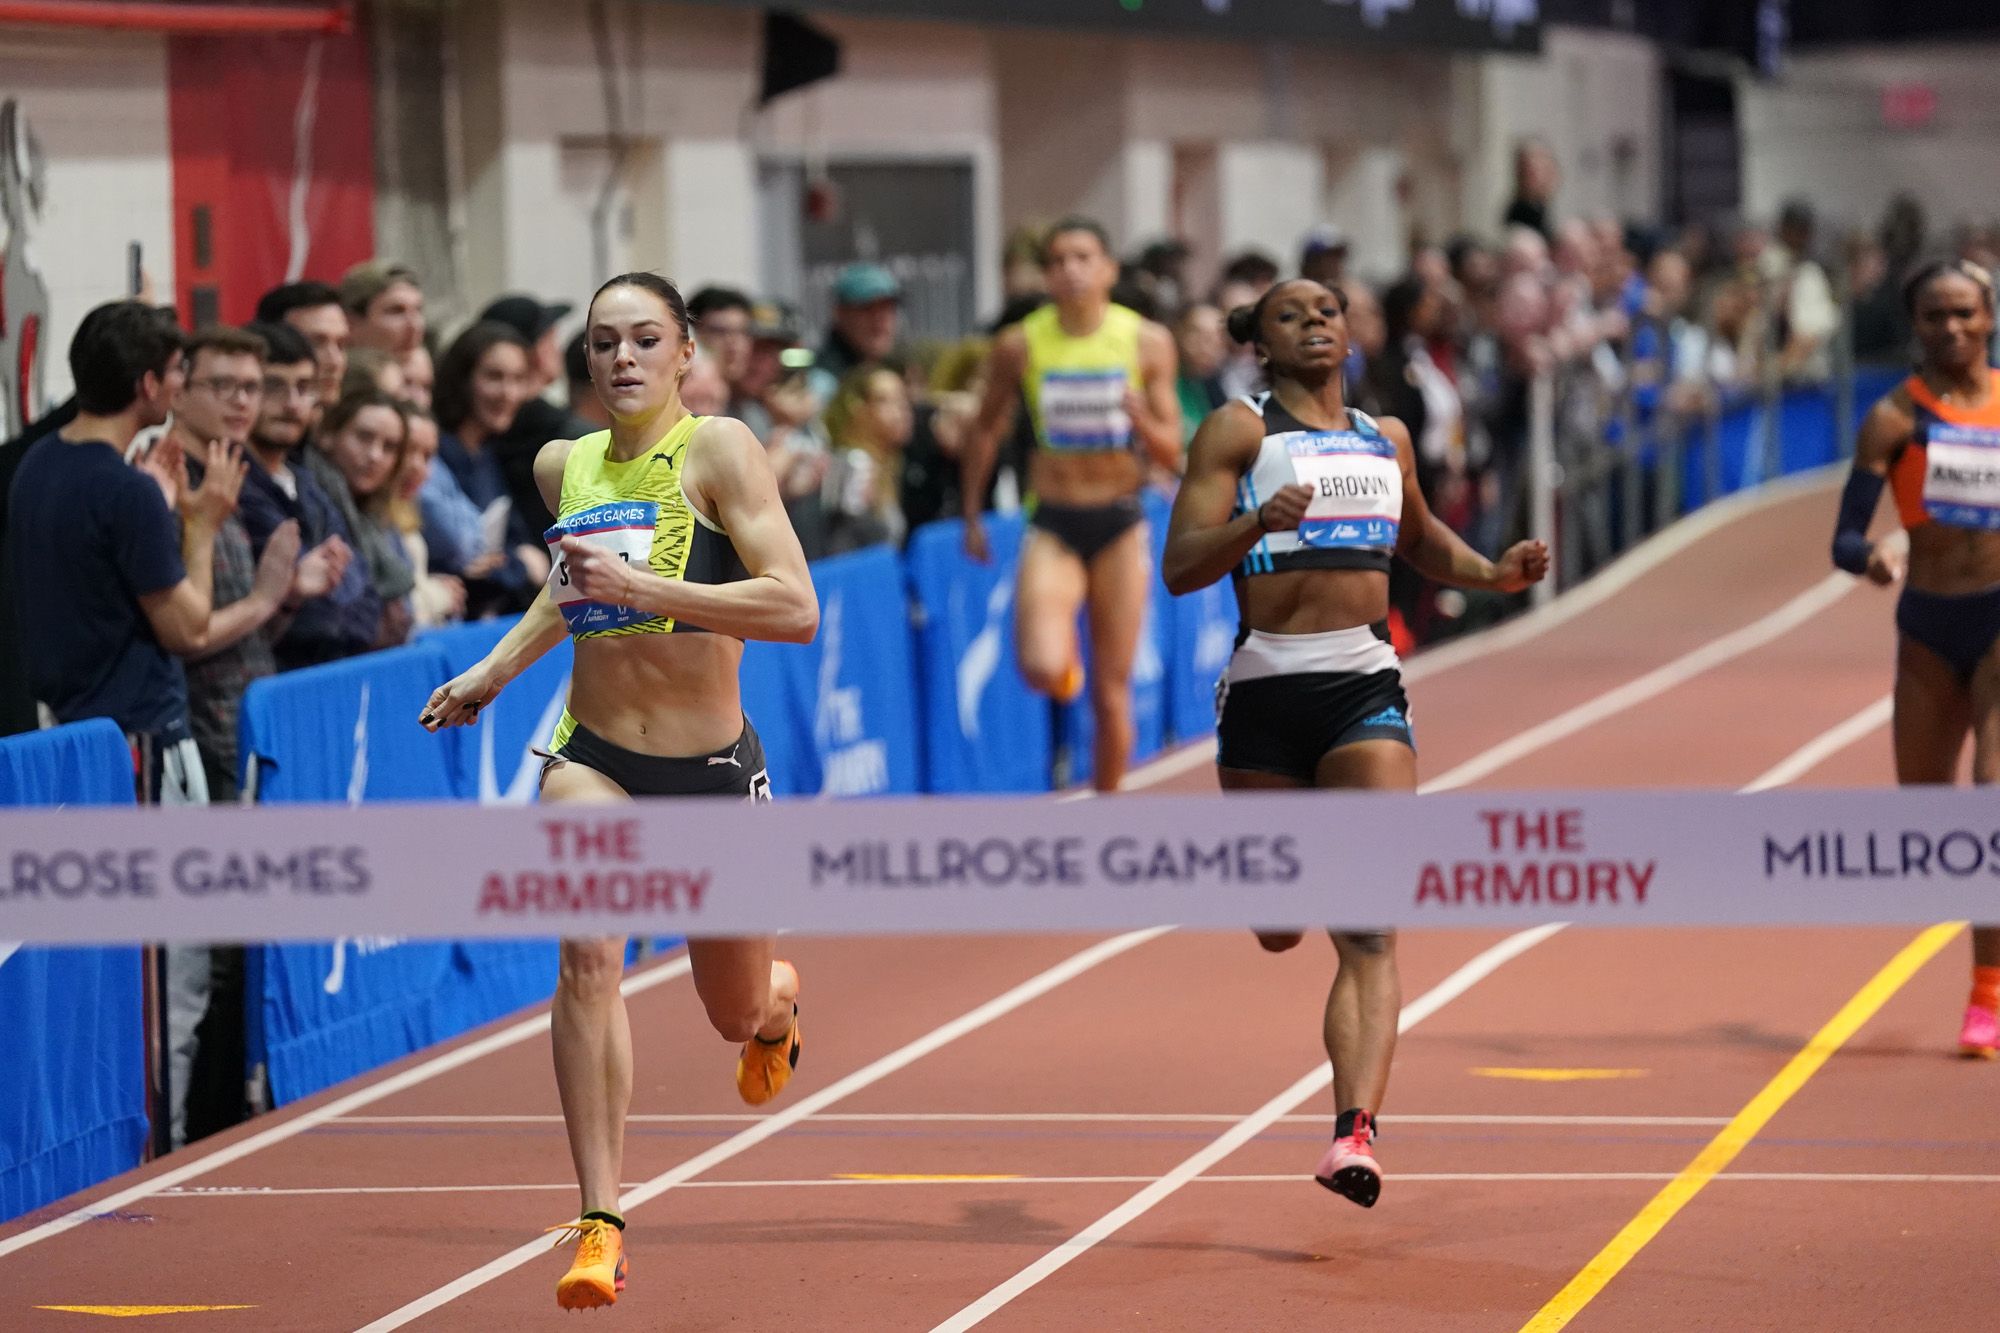 Abby Steiner wins the 300m at the Millrose Games